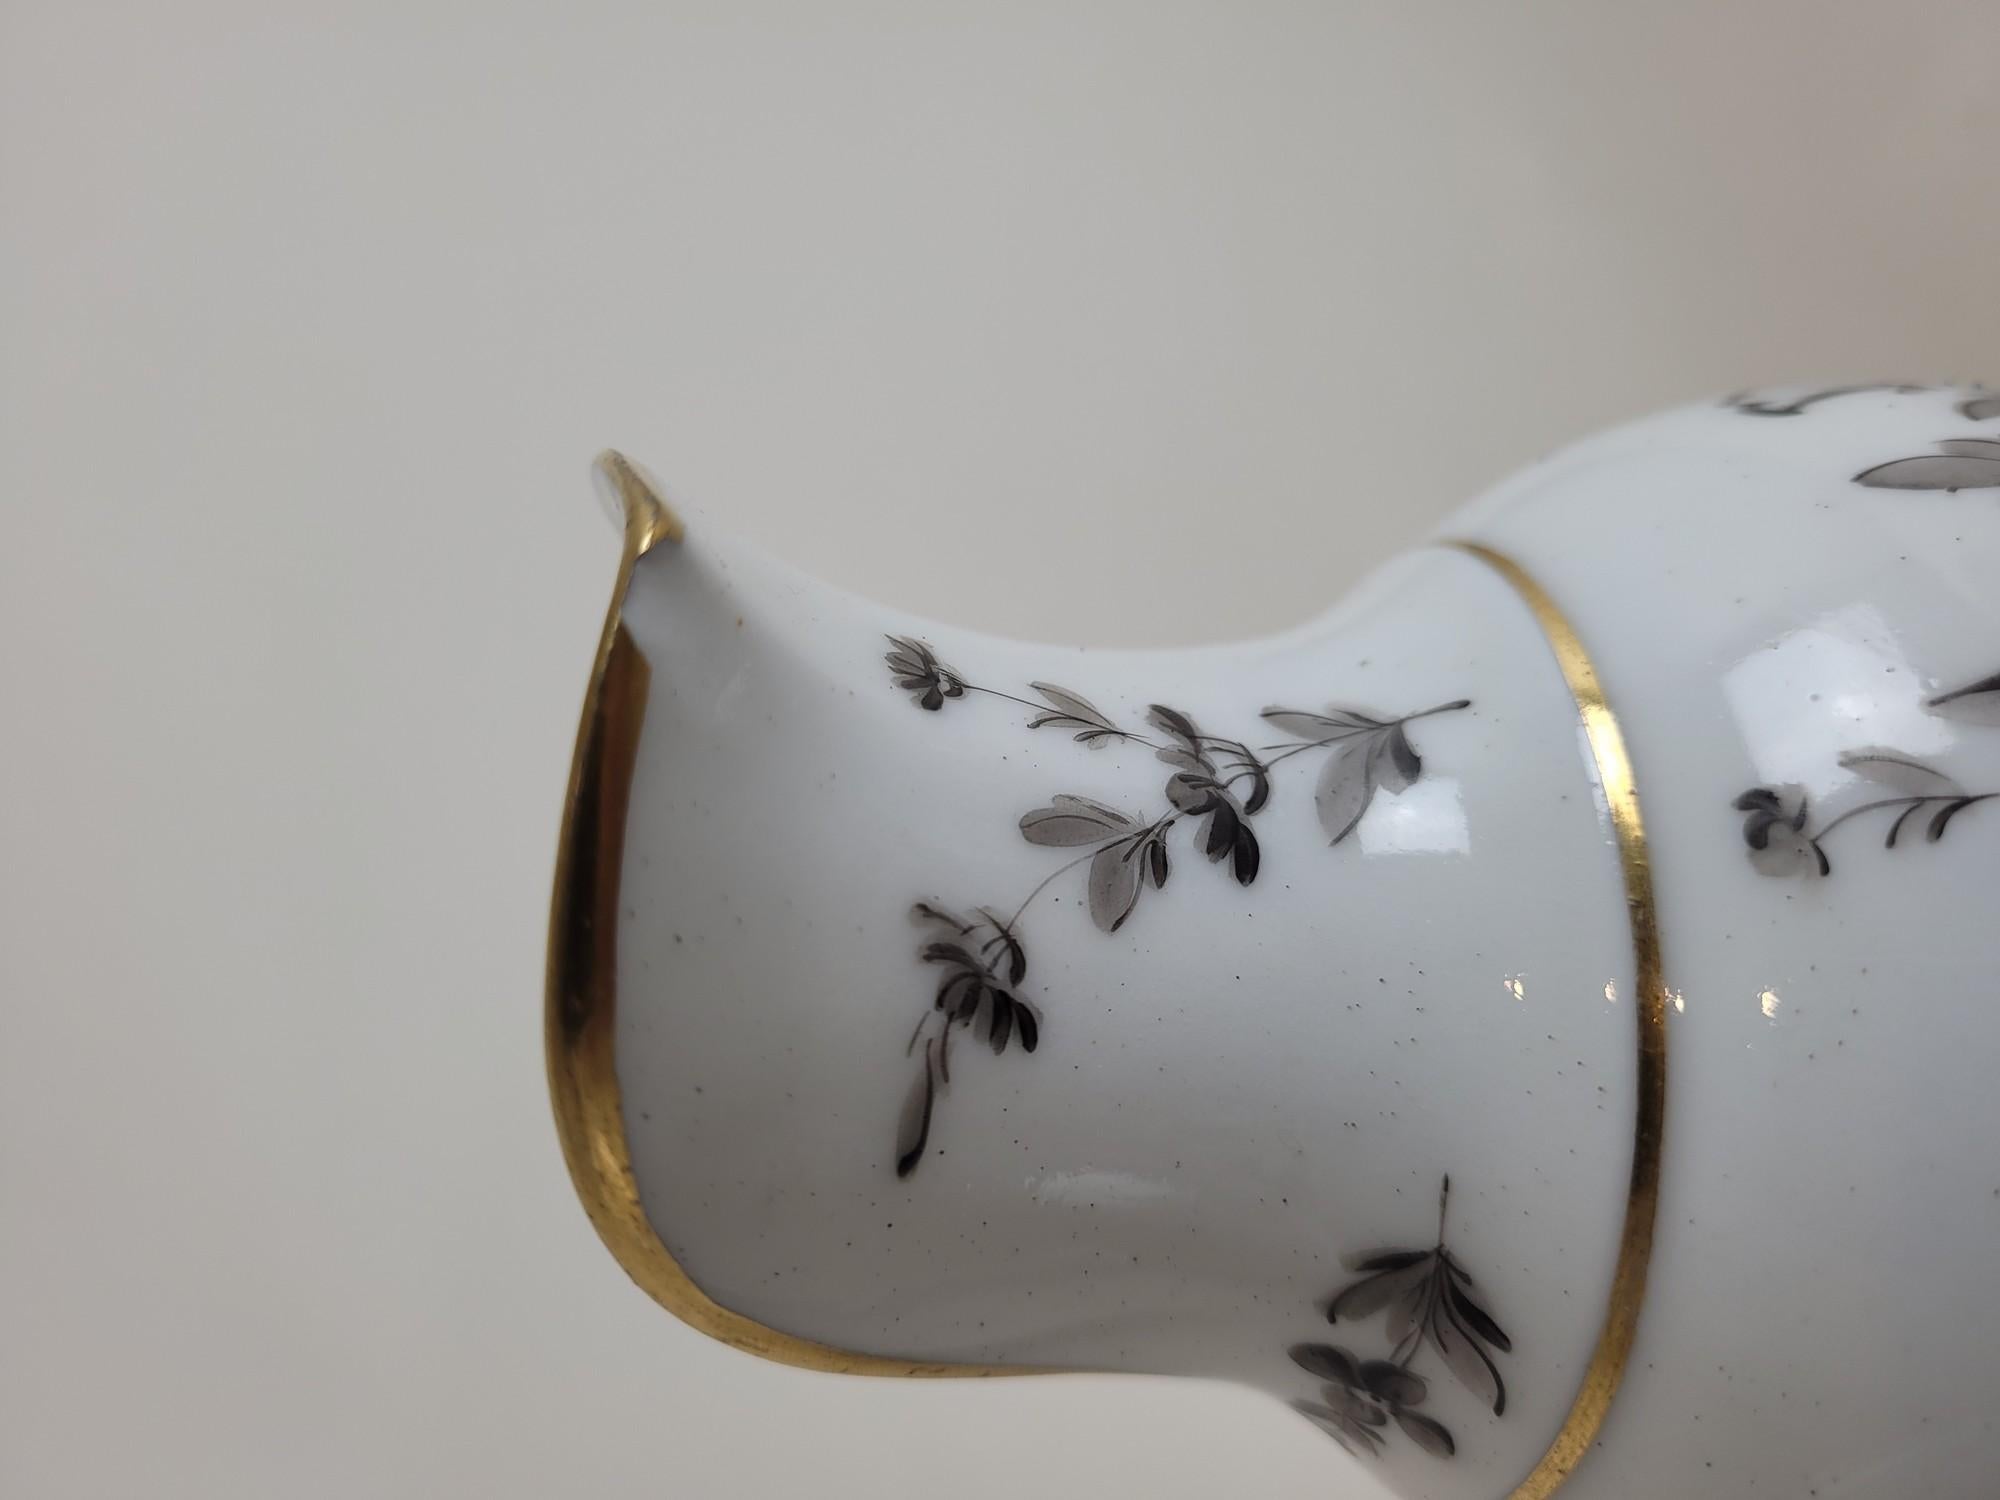 Porcelain Manufacture Du Duc d'Angoulême, Dihl And Guérhard, Coffee Service, Late 18th Cen